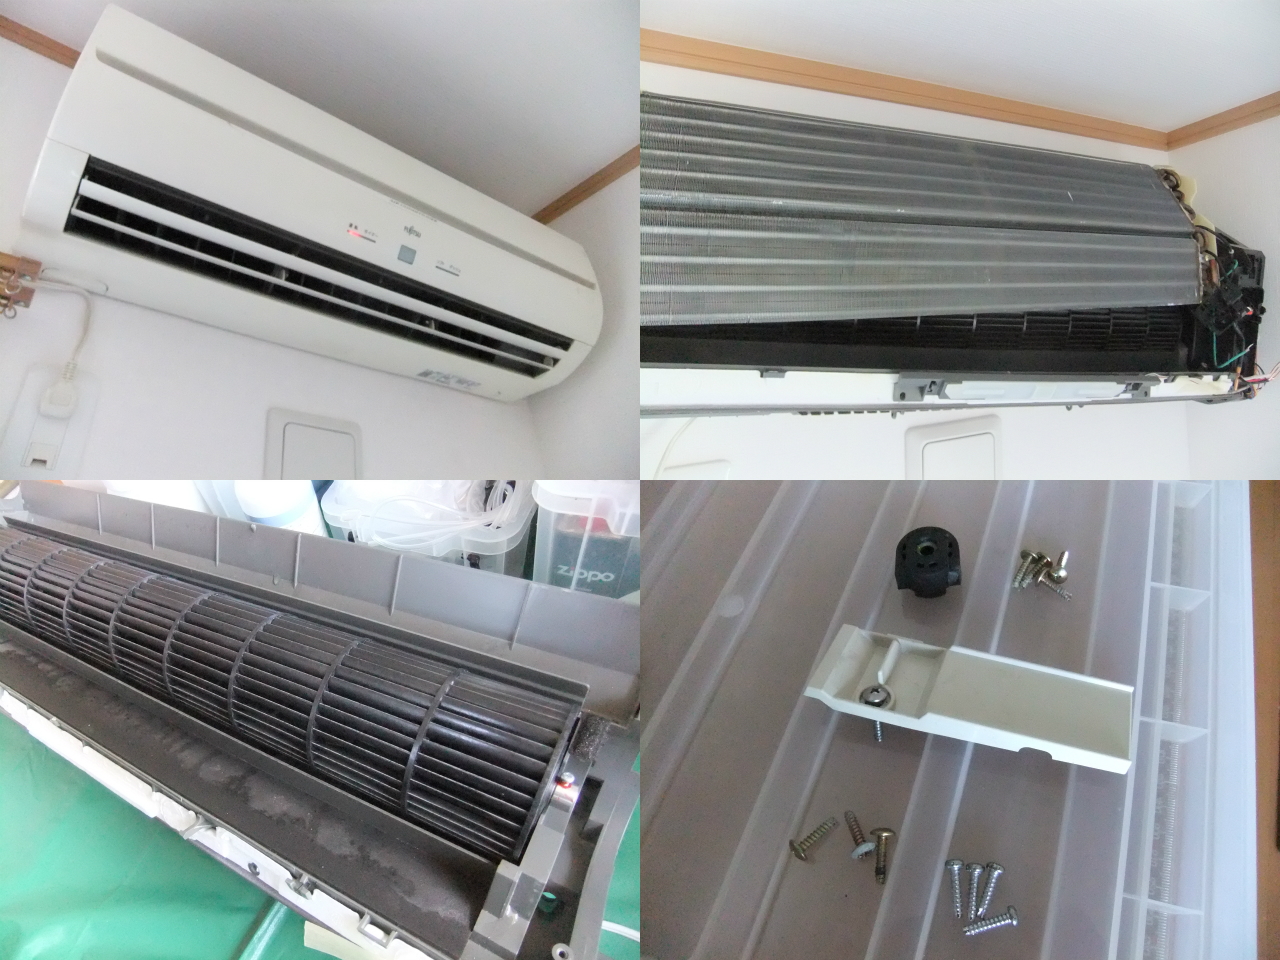 http://ajras.net/images/120717-aircon2.jpg